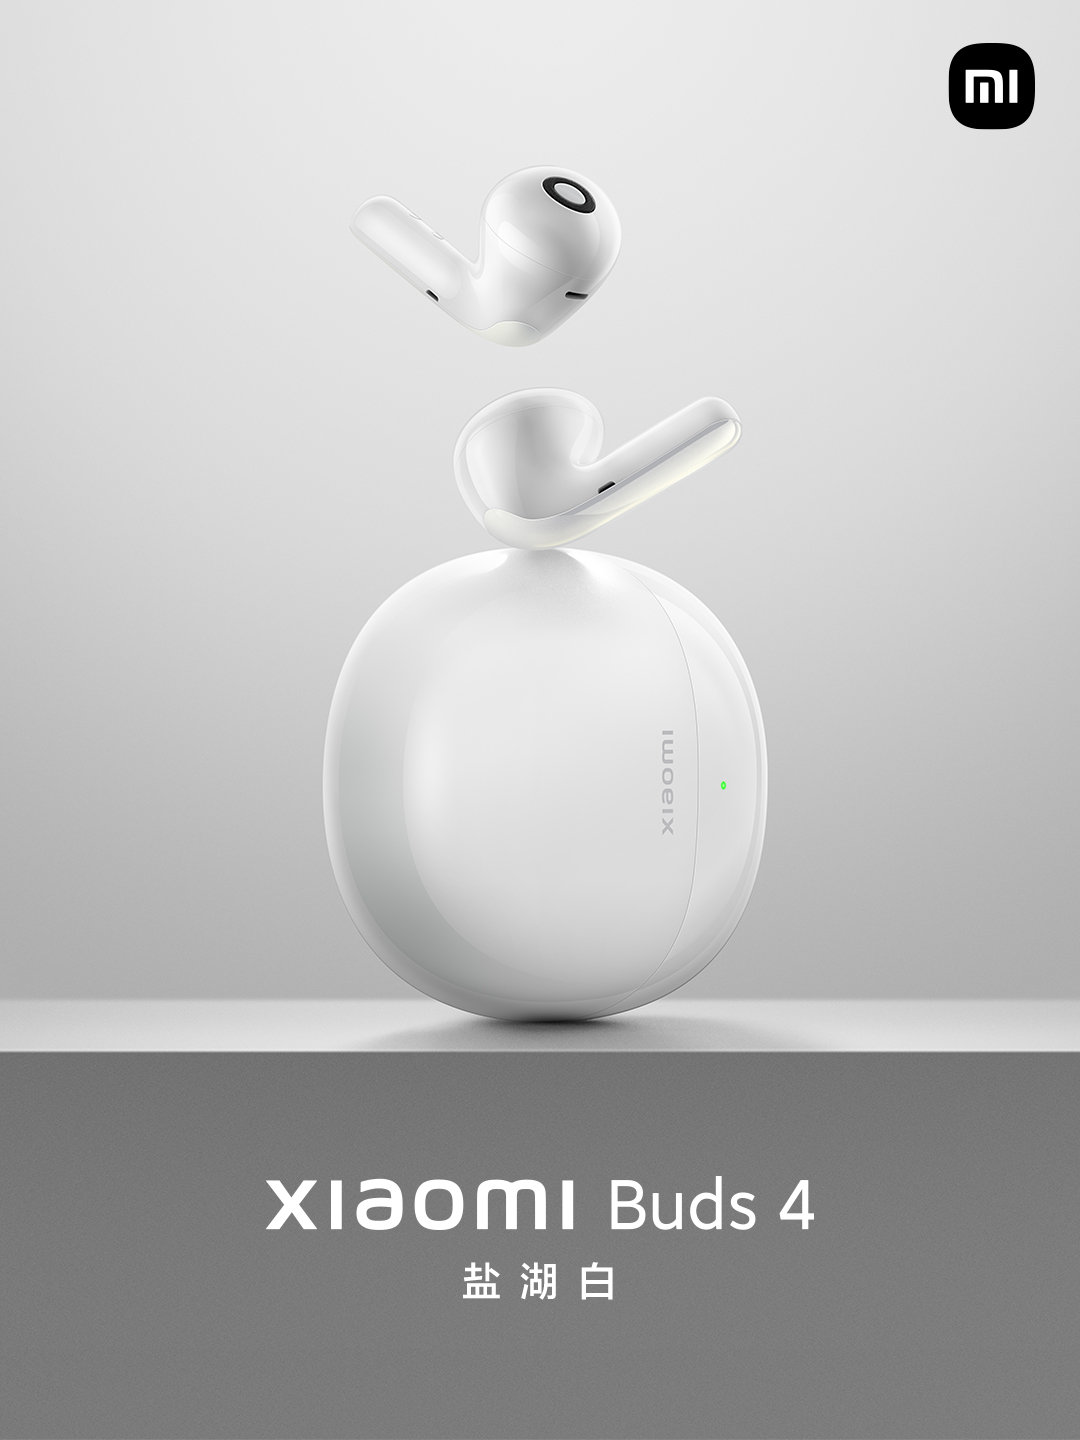 xioami buds 4 poster 1